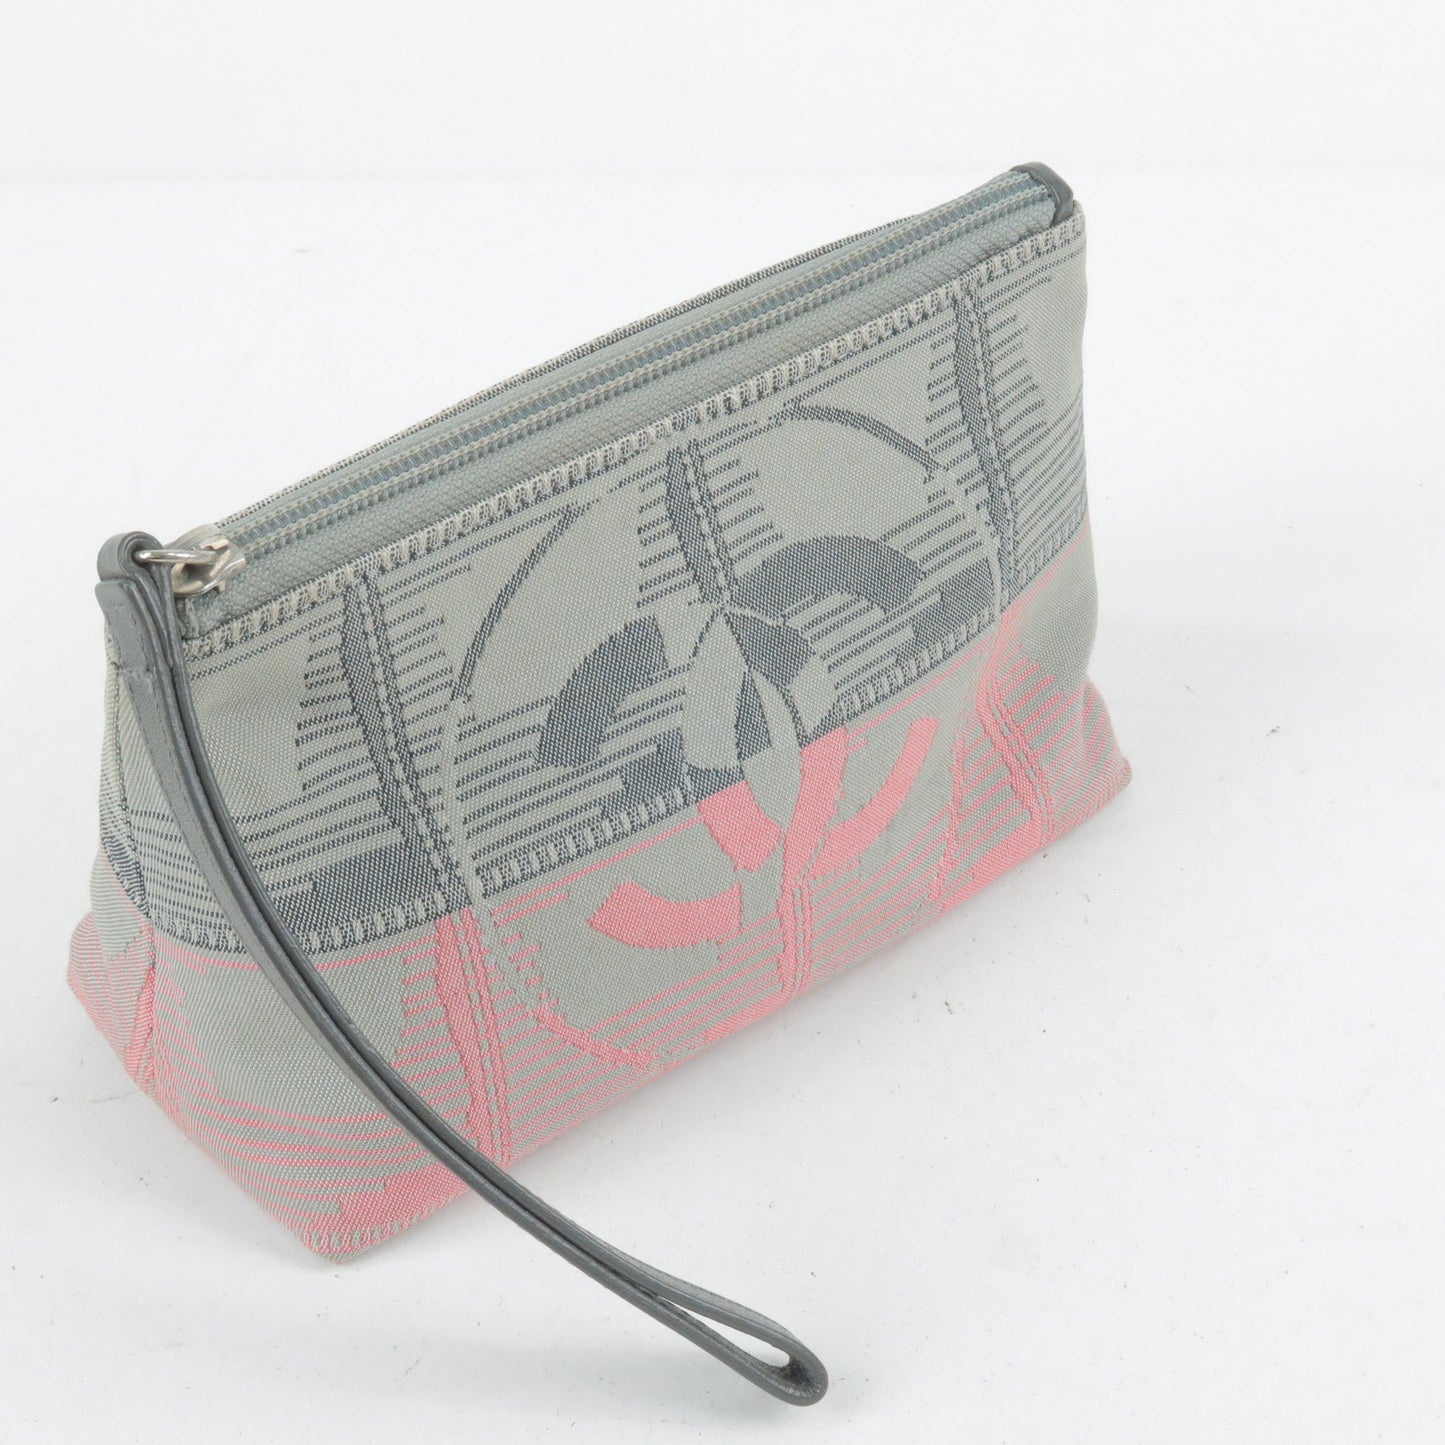 CHANEL New Travel Line Pouch Clutch Bag Gray Pink